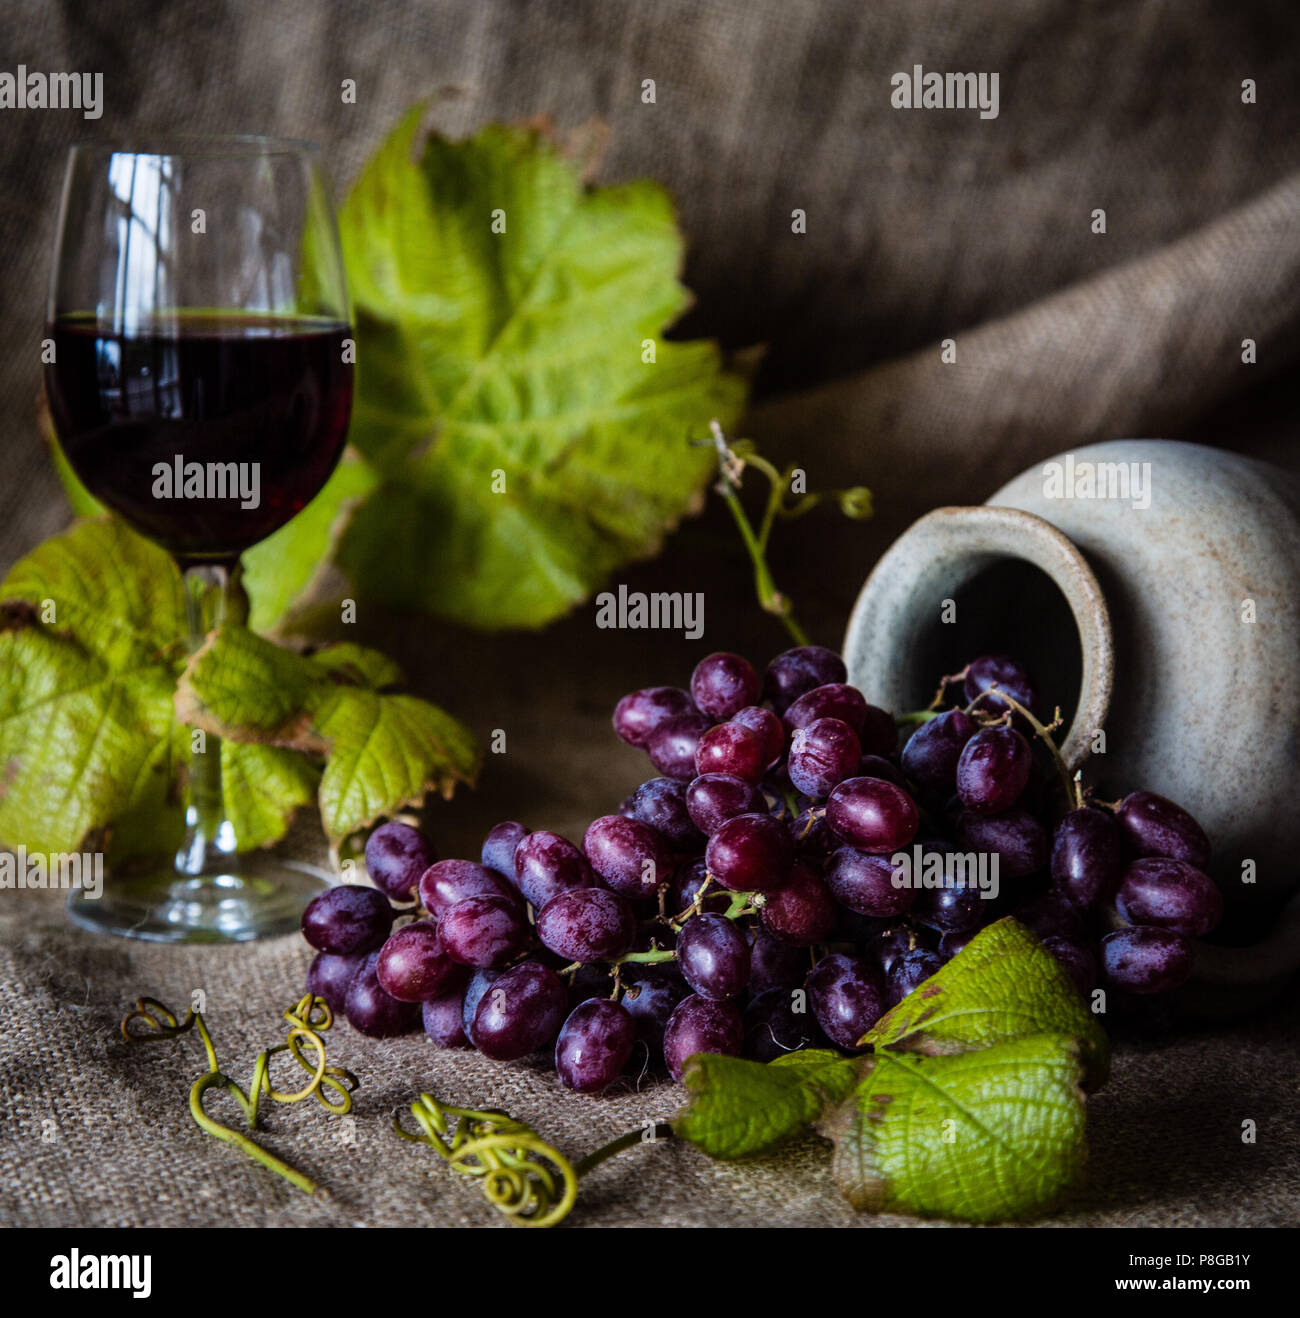 Still life of grapes in an urn with a glass of red wine Stock Photo